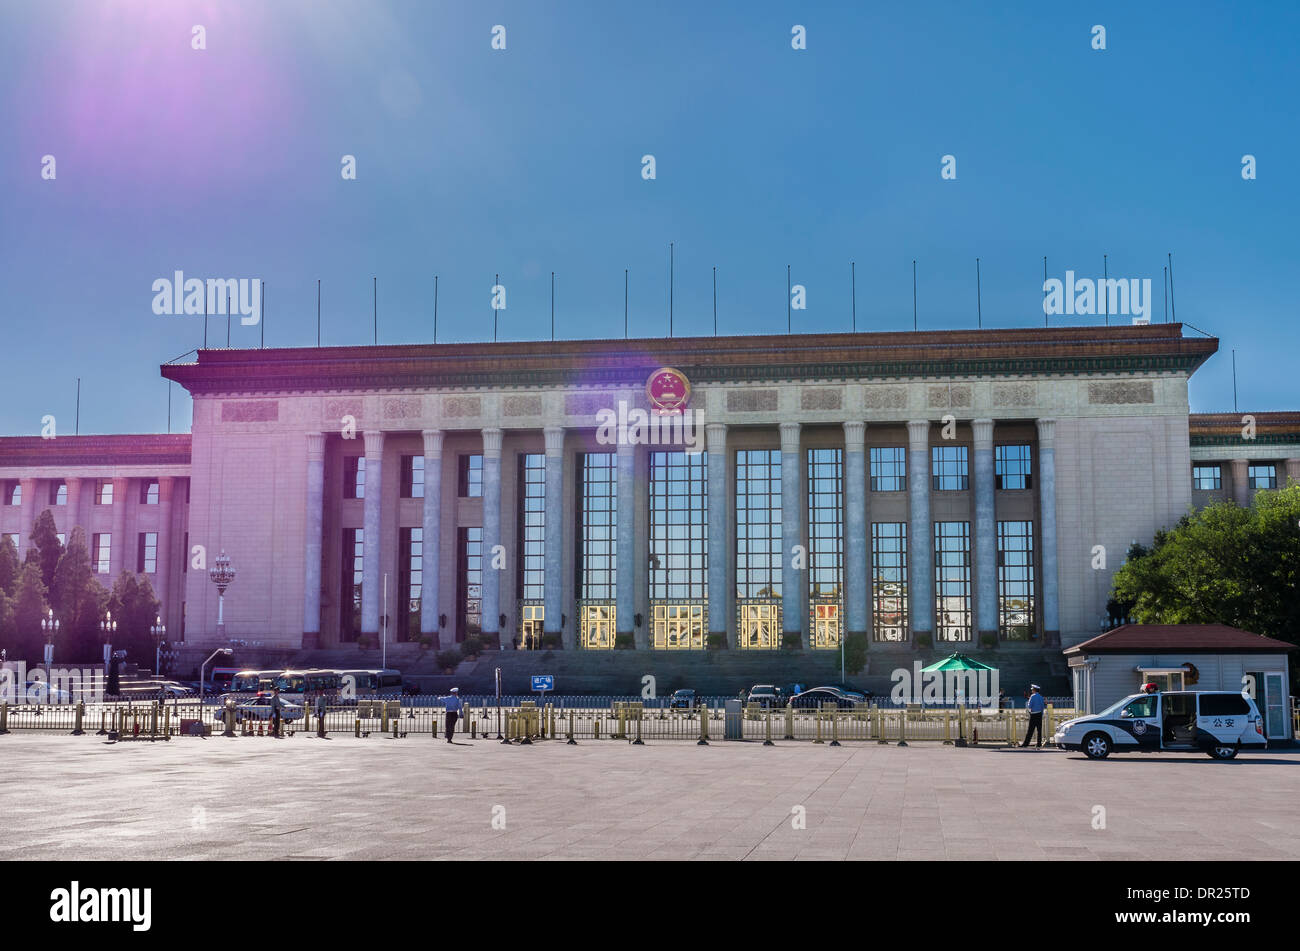 Great Hall of the People, Beijing, China Stock Photo